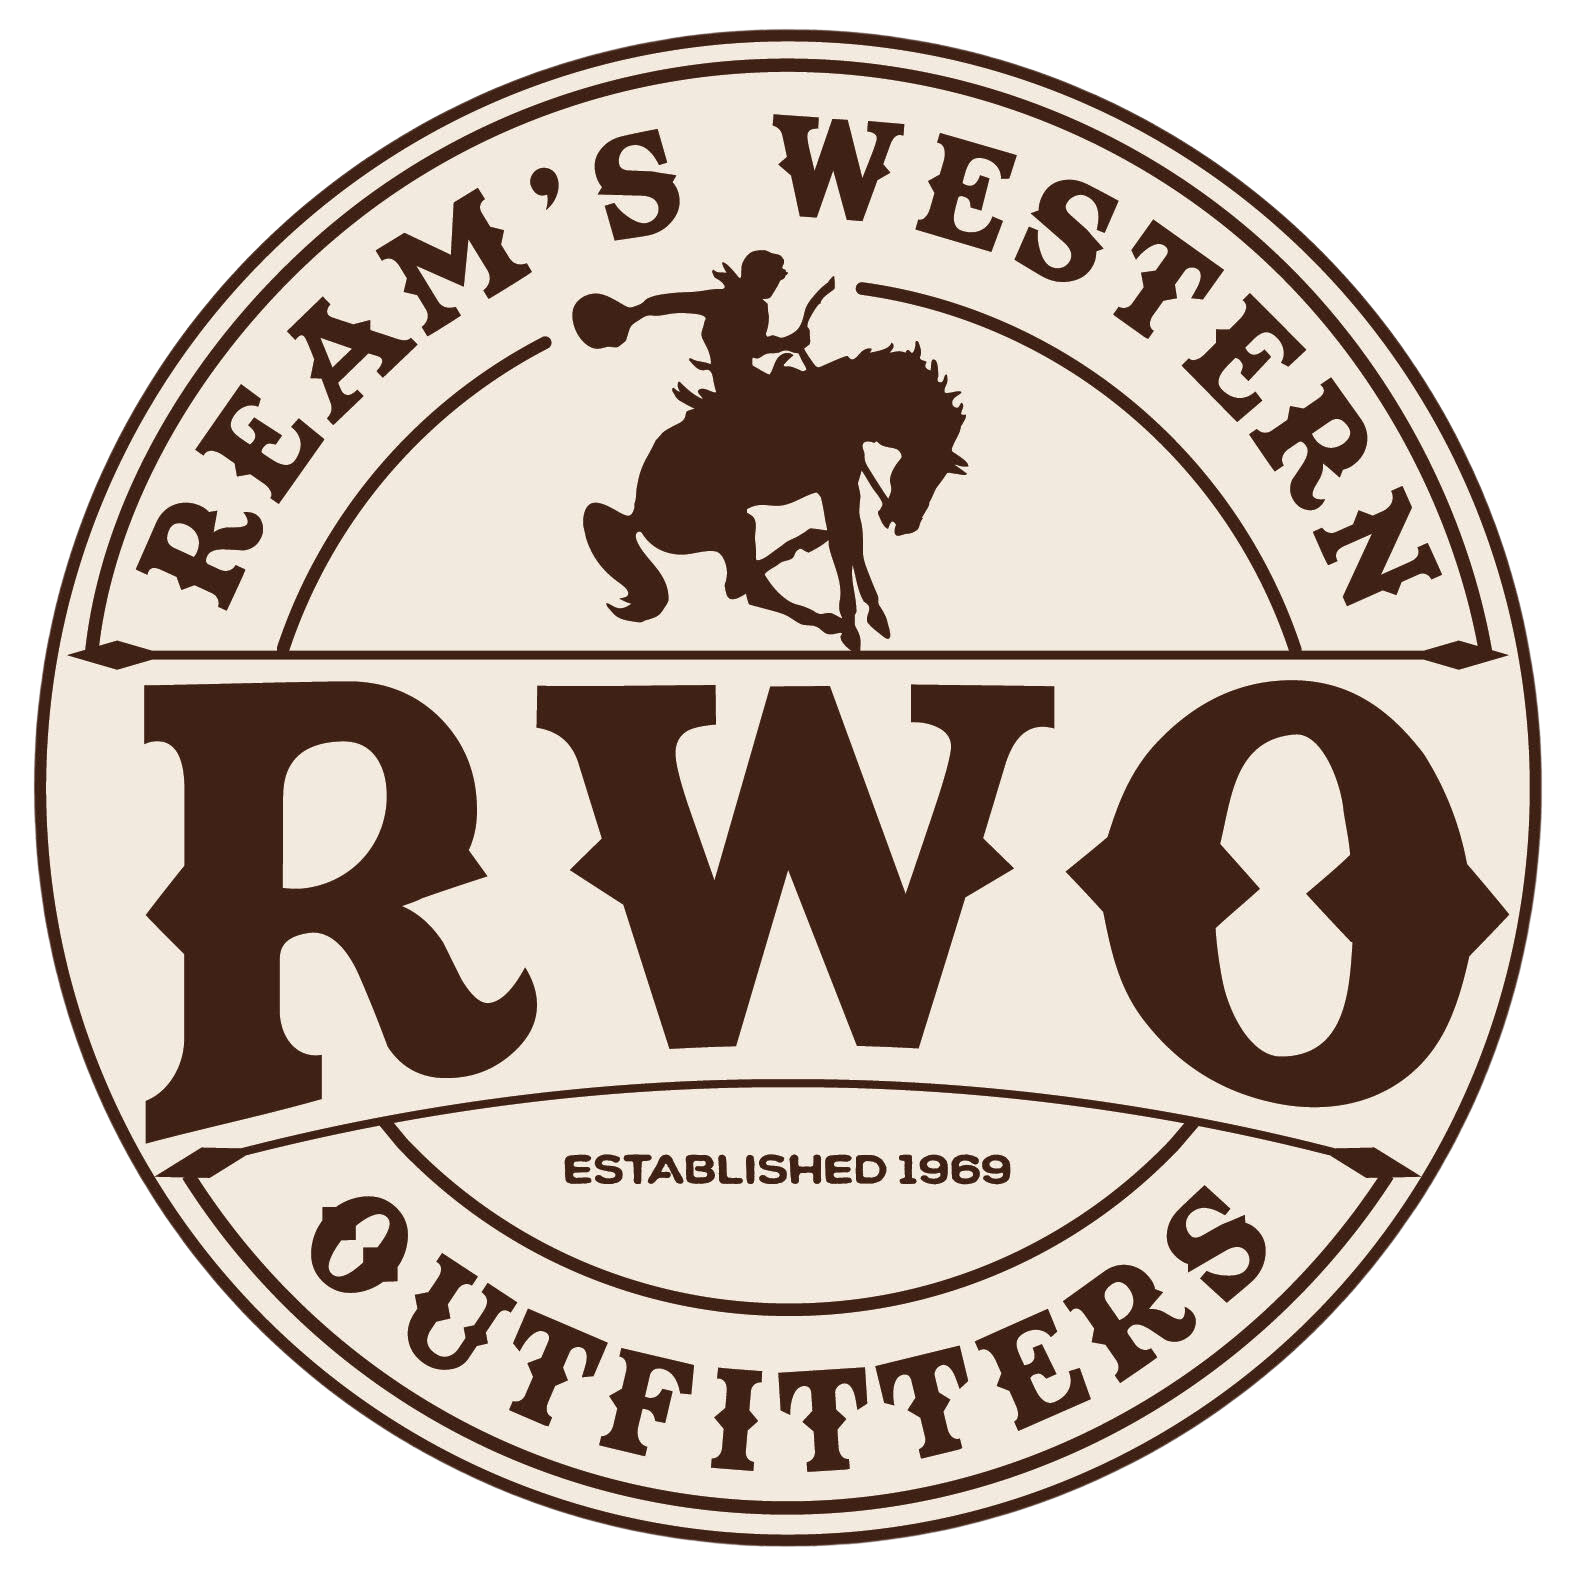 Reams Western Outfitters